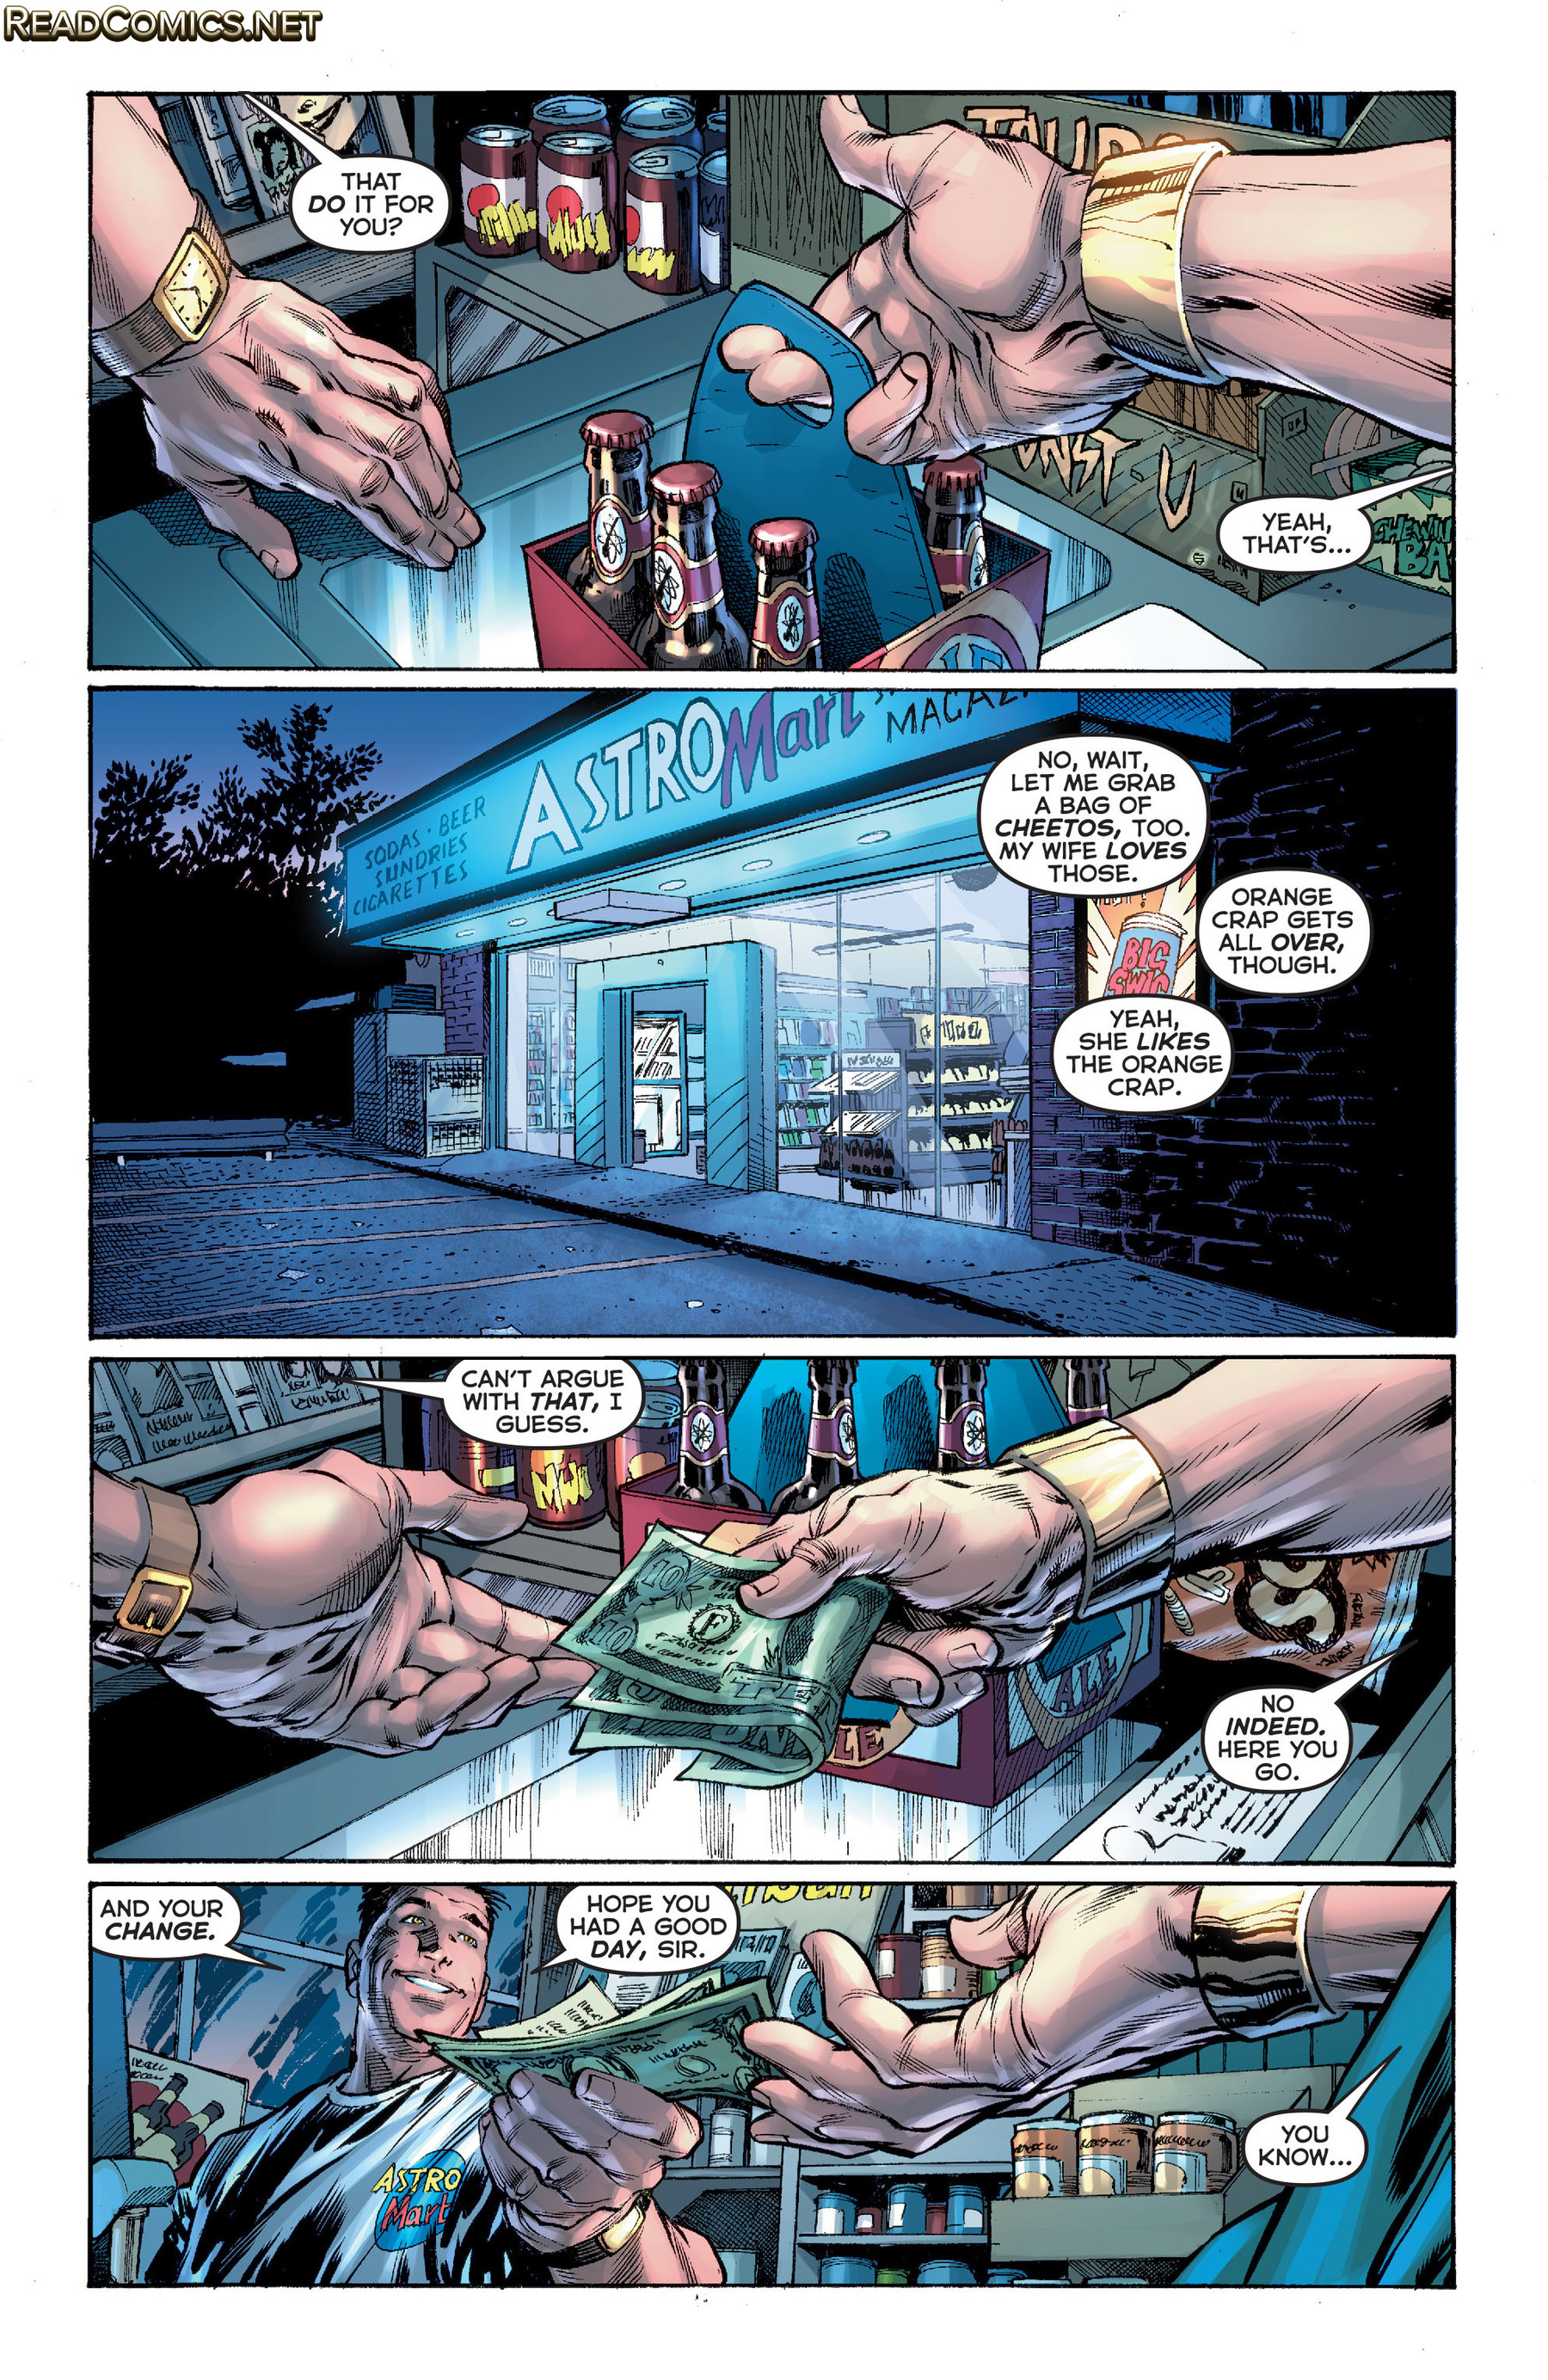 Astro City (2013-): Chapter 22 - Page 2